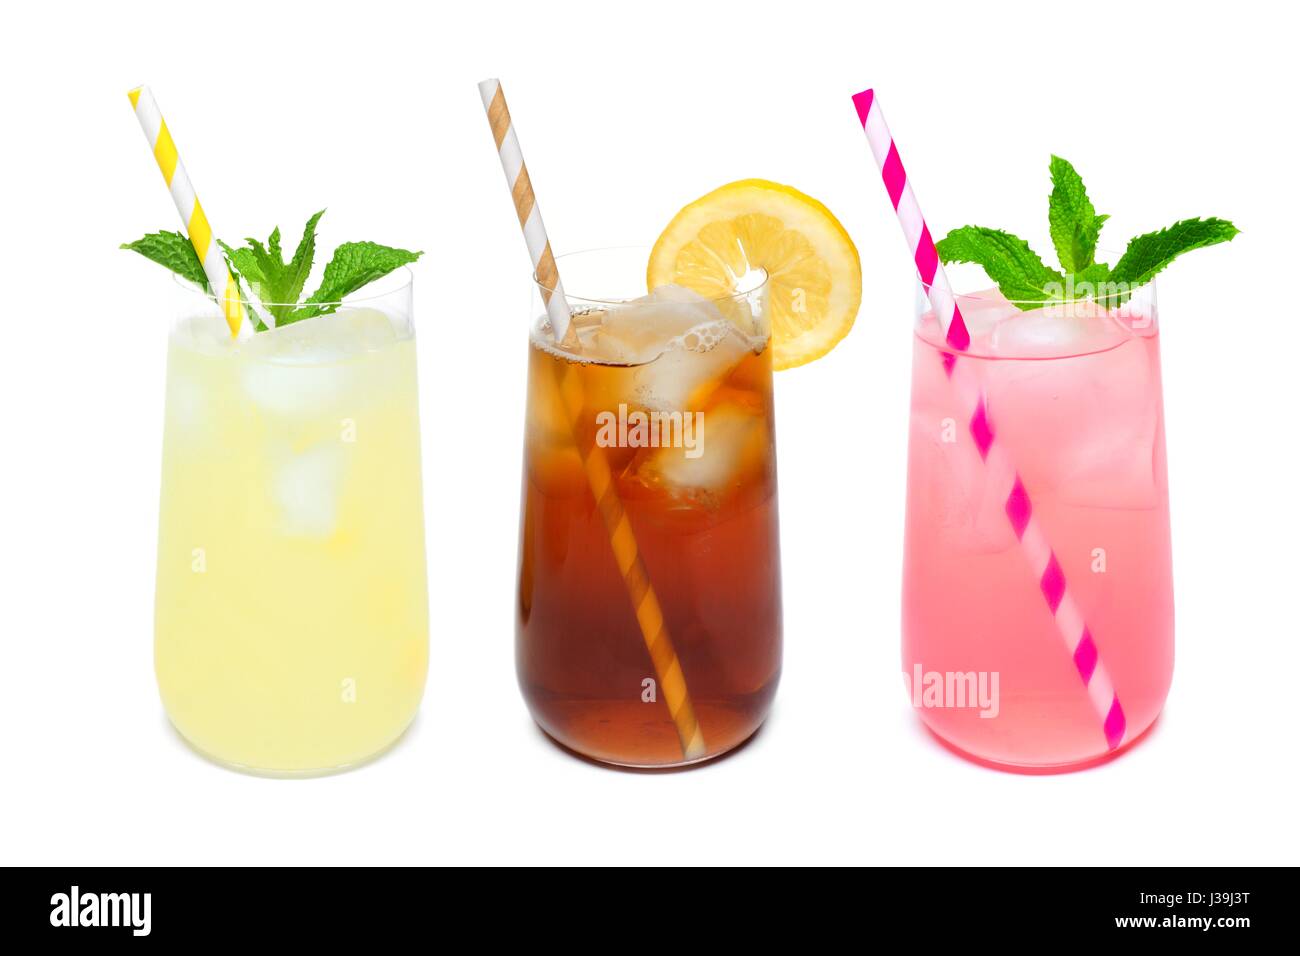 Three rounded glasses of summer lemonade, iced tea, and pink lemonade drinks with straws isolated on a white background Stock Photo